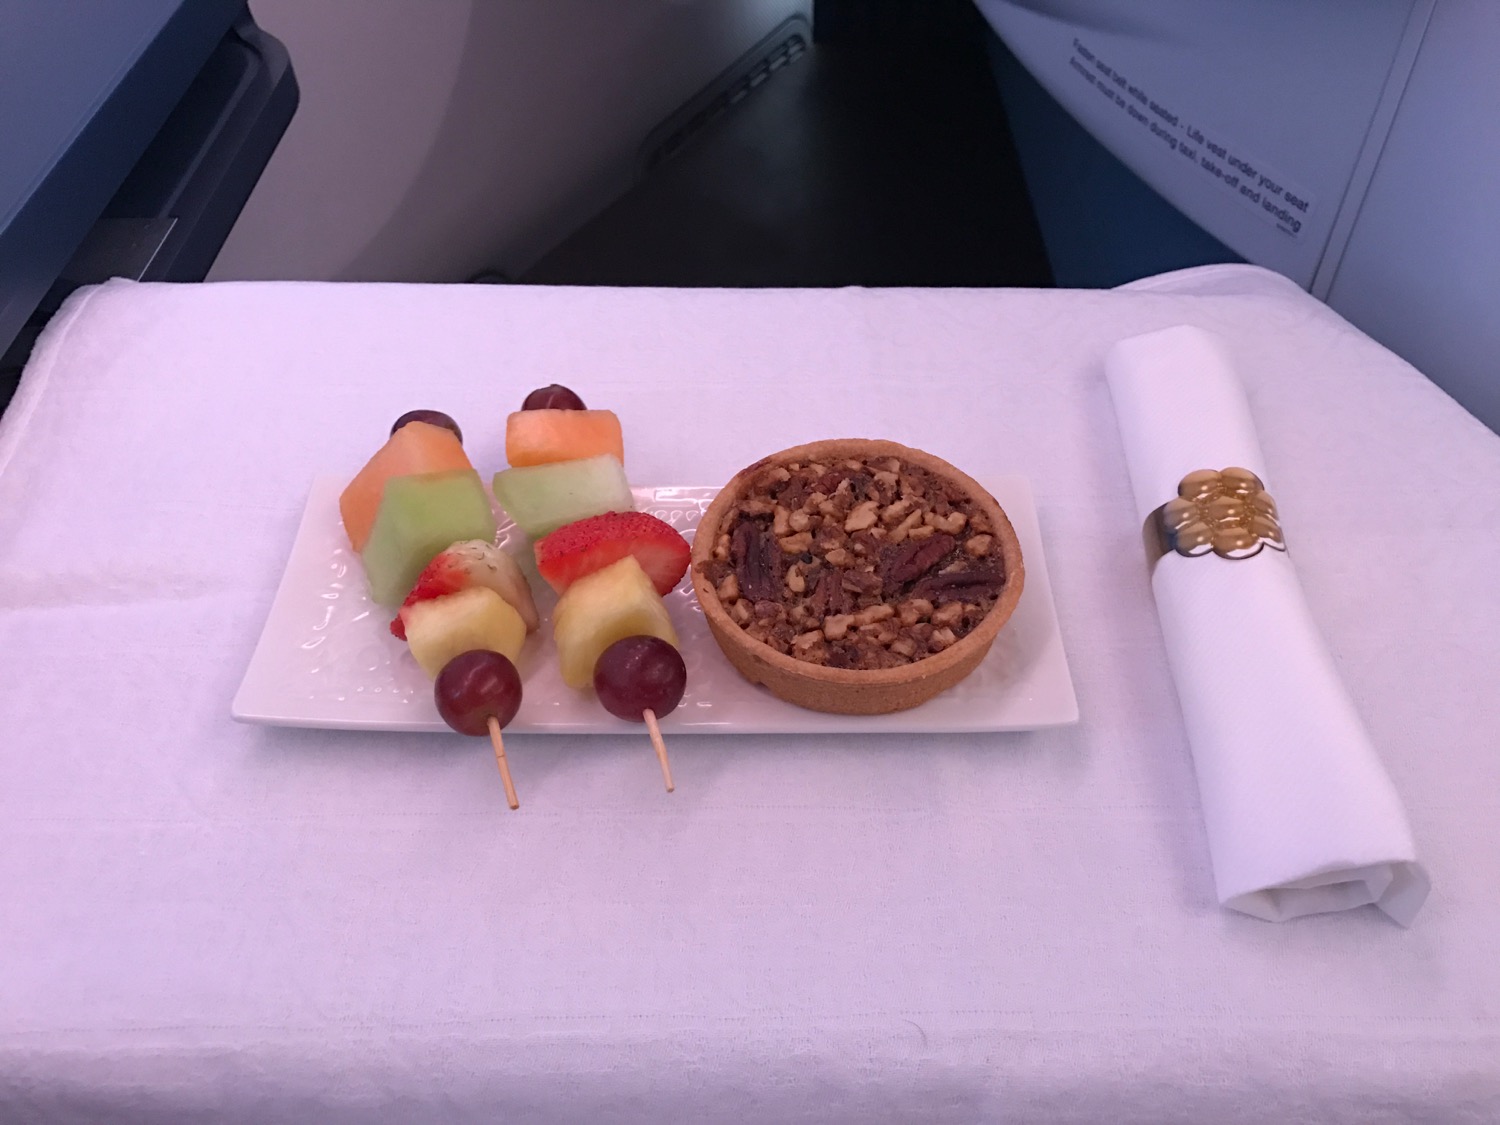 KLM 787 Business Class Review - 77